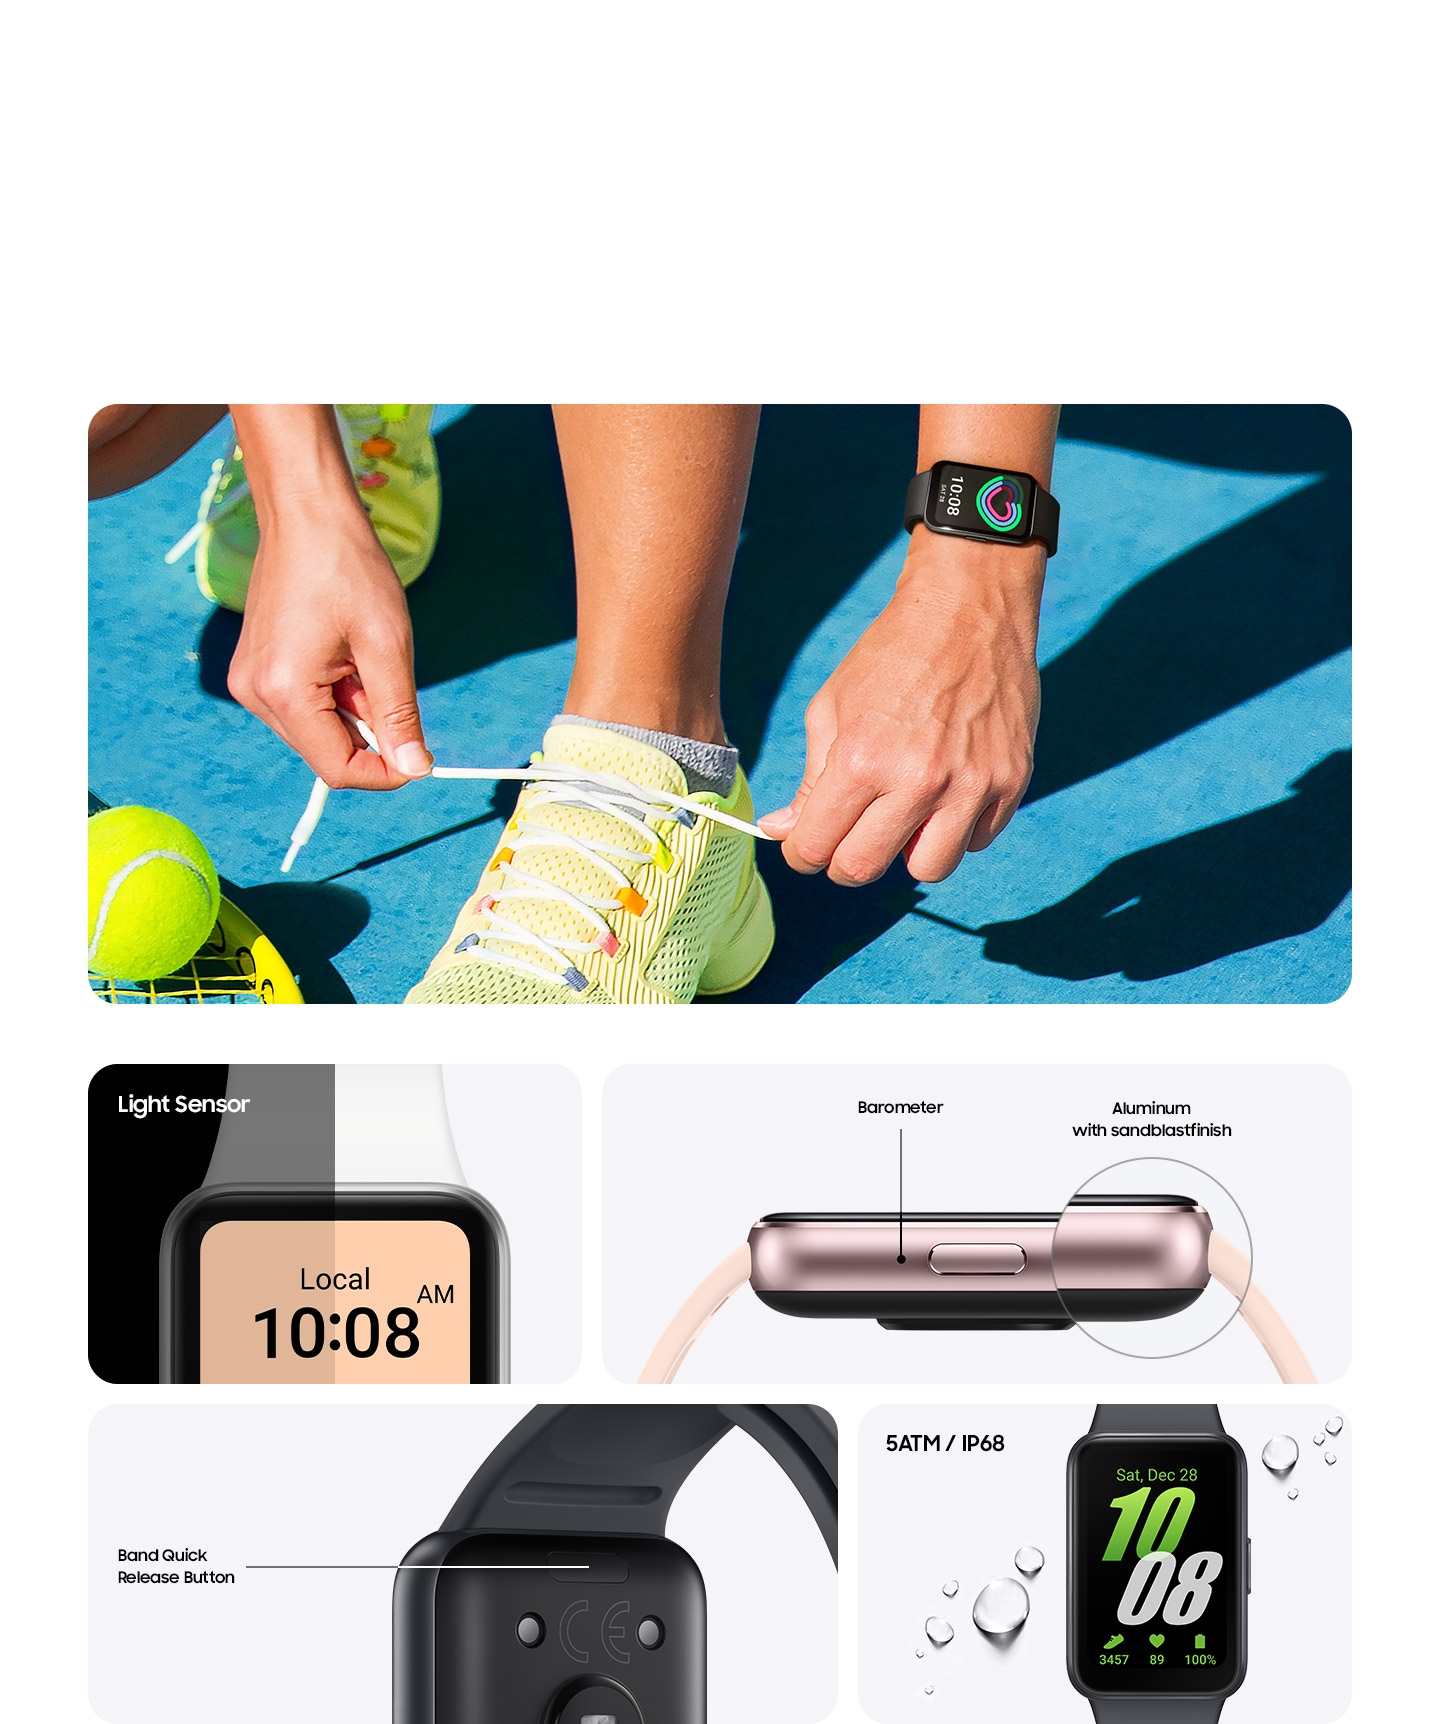 Alt_ top) Two hands tying shoelaces of a tennis shoe with one of them wearing Galaxy Fit3 with Daily Activity tracking feature on its display, 
Alt_bottom) Four tiles, each showing a different design feature of Galaxy Fit3. One with the Band Quick Release Button in the back. Another one with the side in close up to show Barometer and Aluminum with sandblastfinish. Another one with the screen where each half shows different brightness to indicate Light Sensor. The other one with water droplets on the screen to illustrate water resistance.